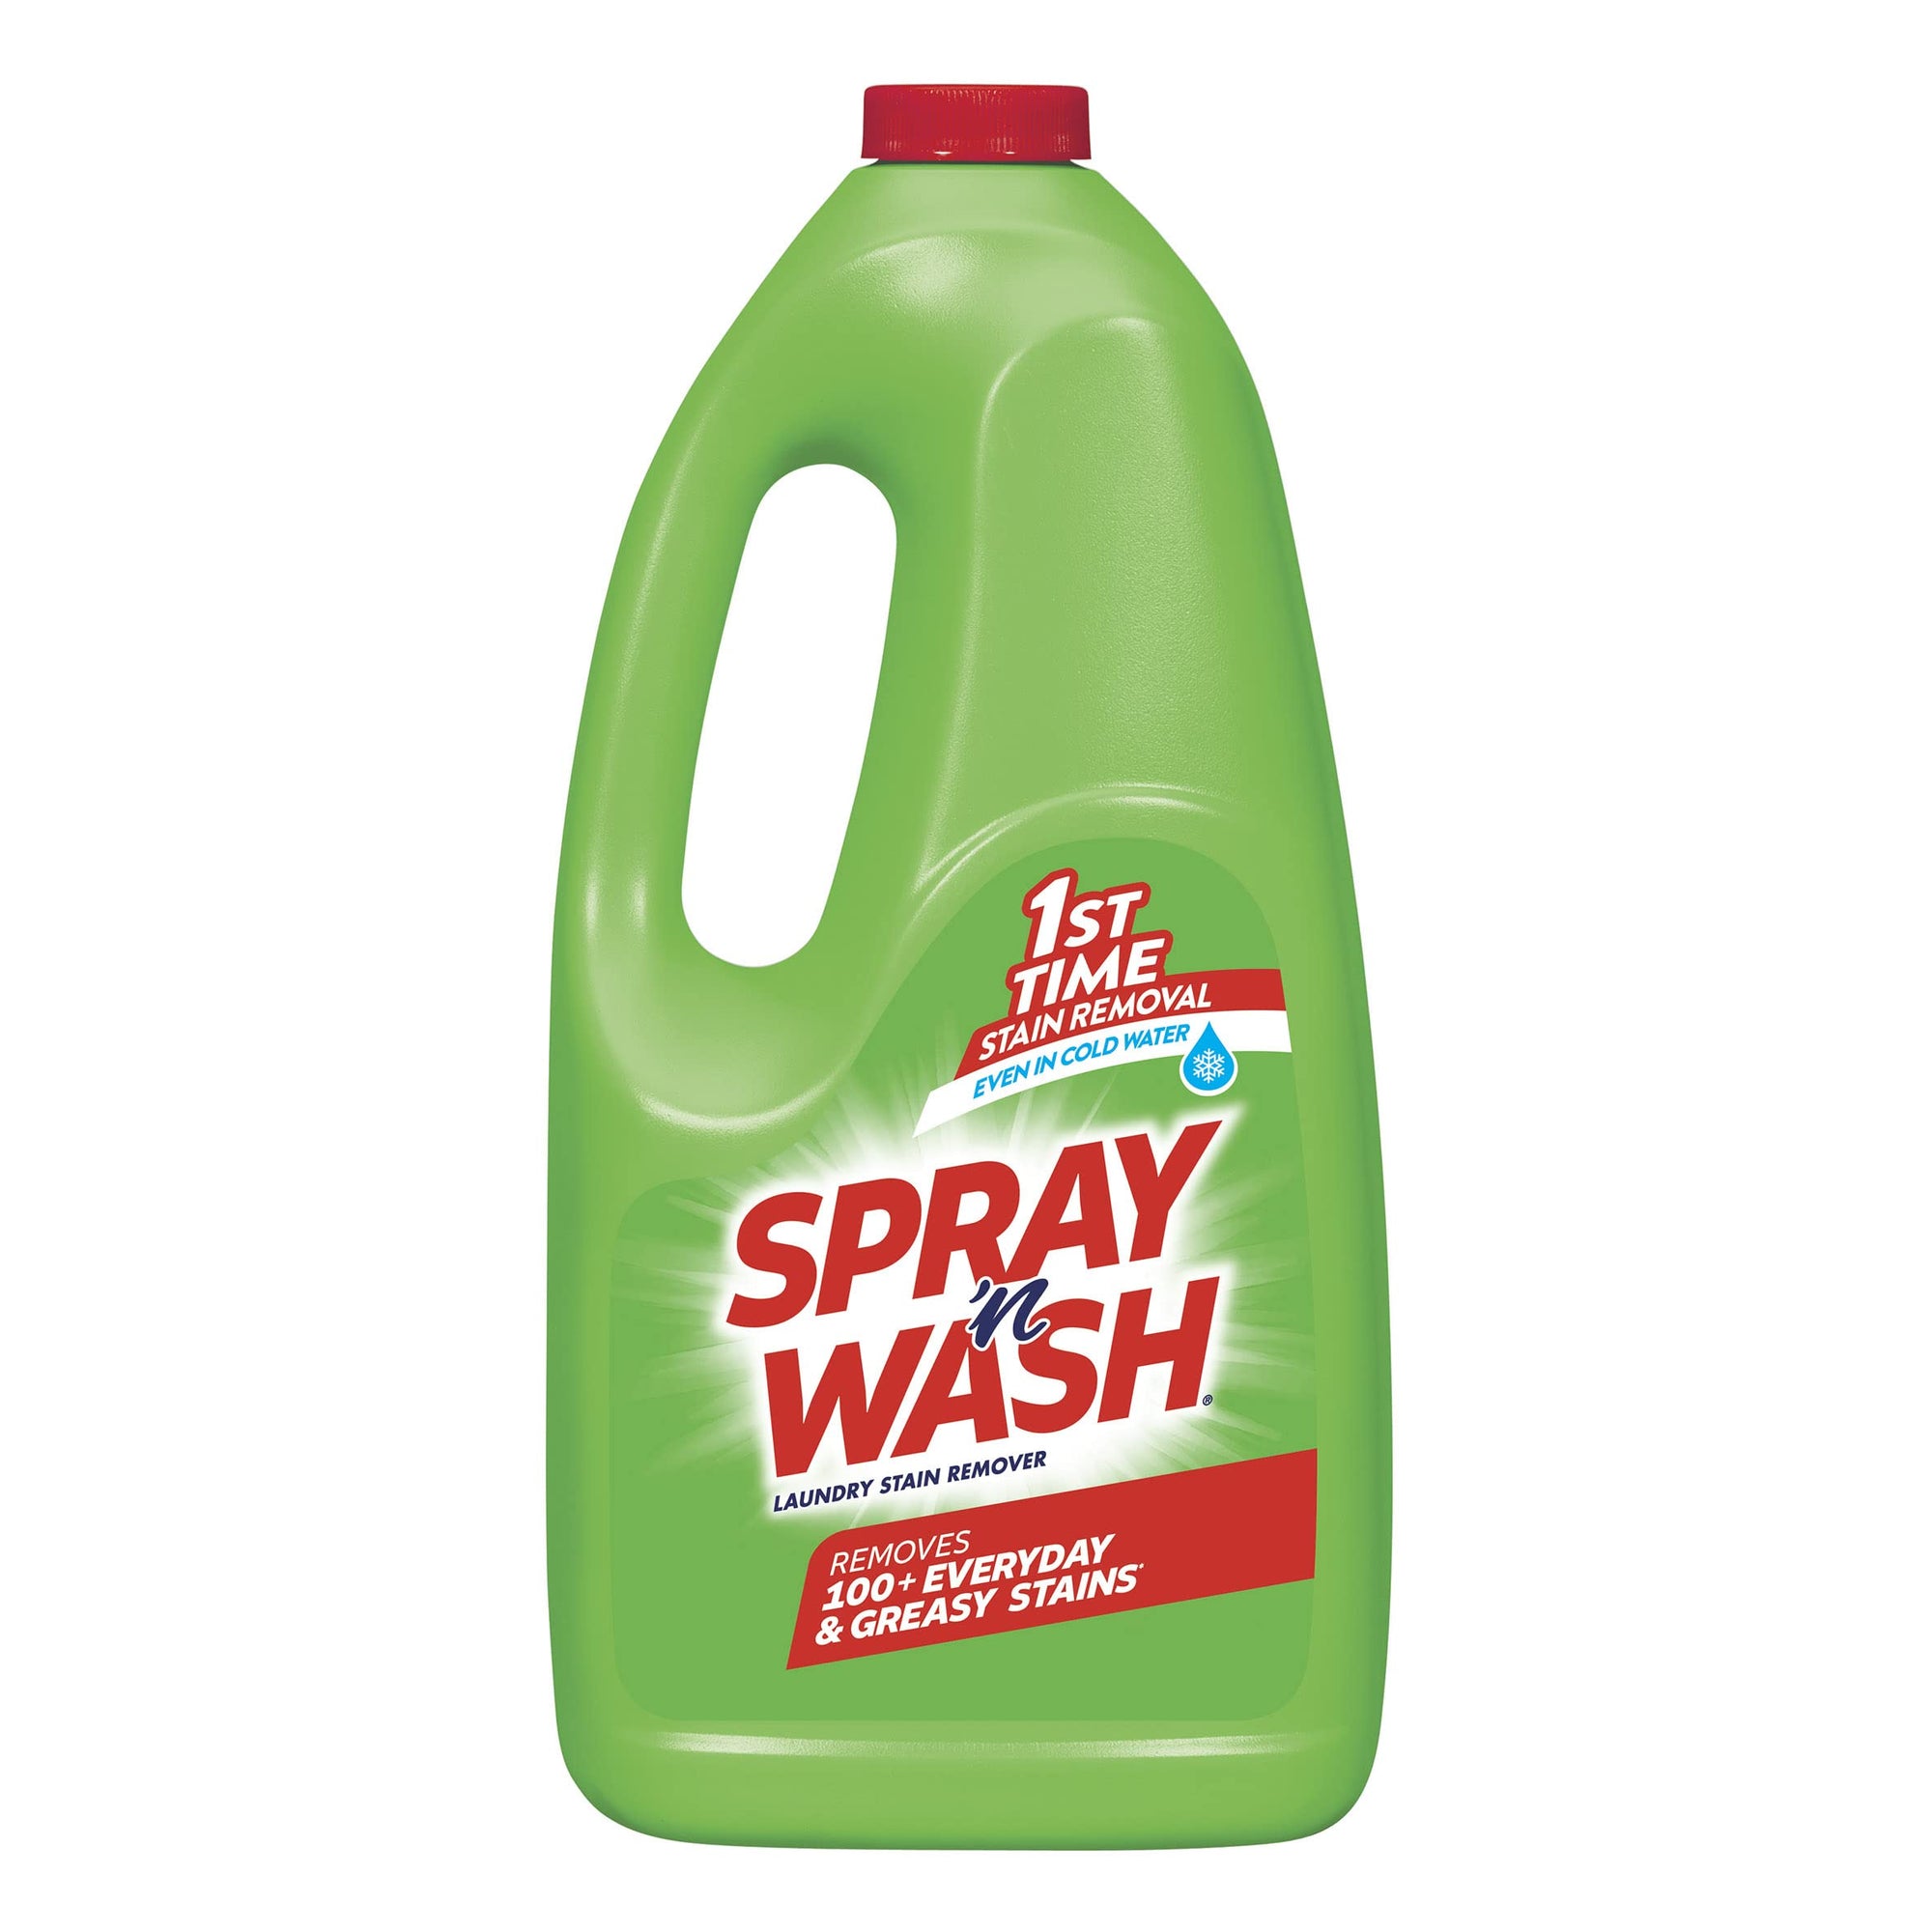 Spray 'n Wash Pre-Treat Laundry Stain Remover Refill, 60oz Bottle062338755519